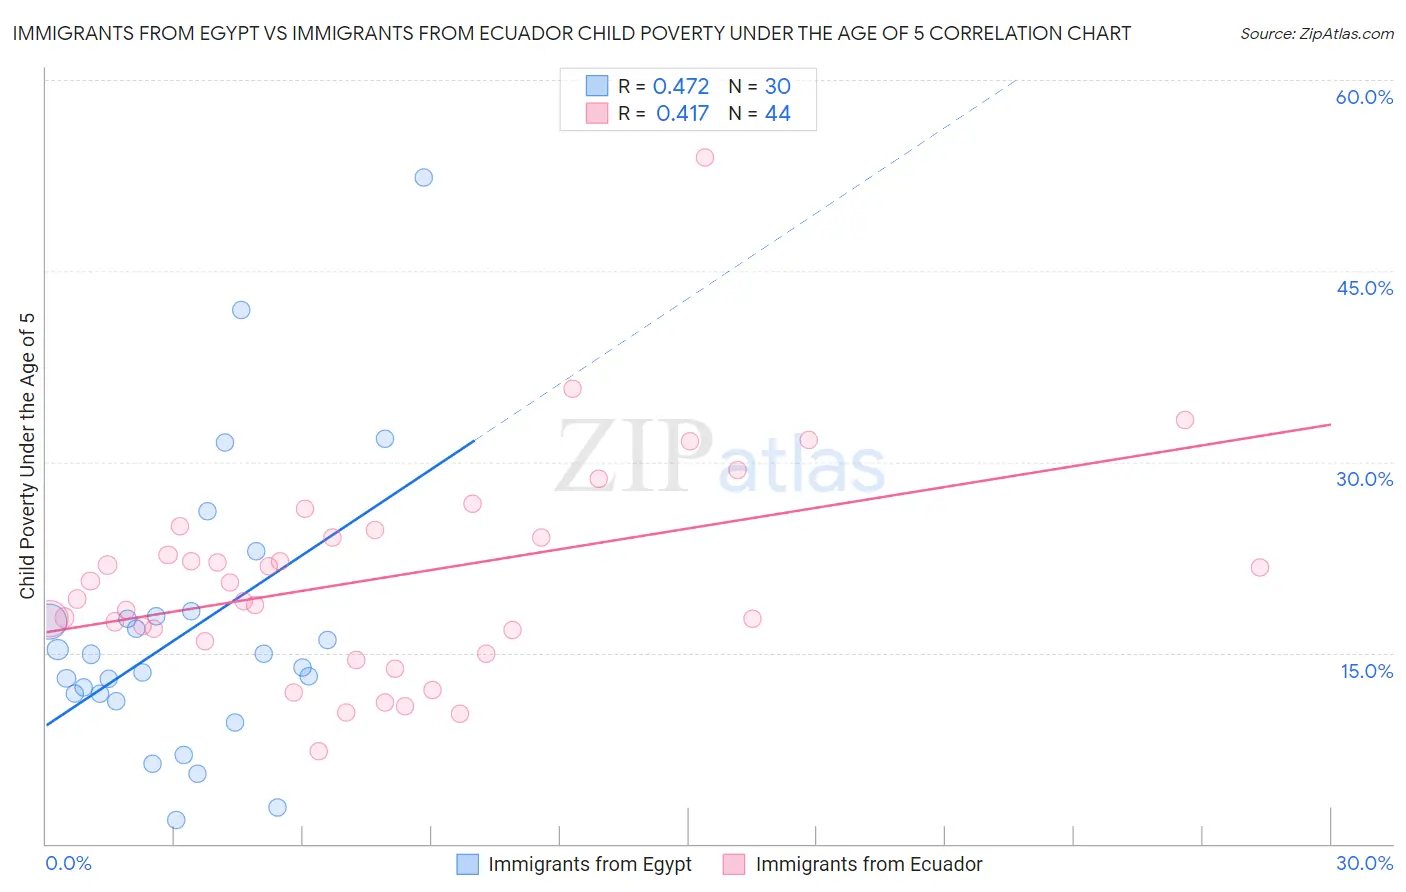 Immigrants from Egypt vs Immigrants from Ecuador Child Poverty Under the Age of 5